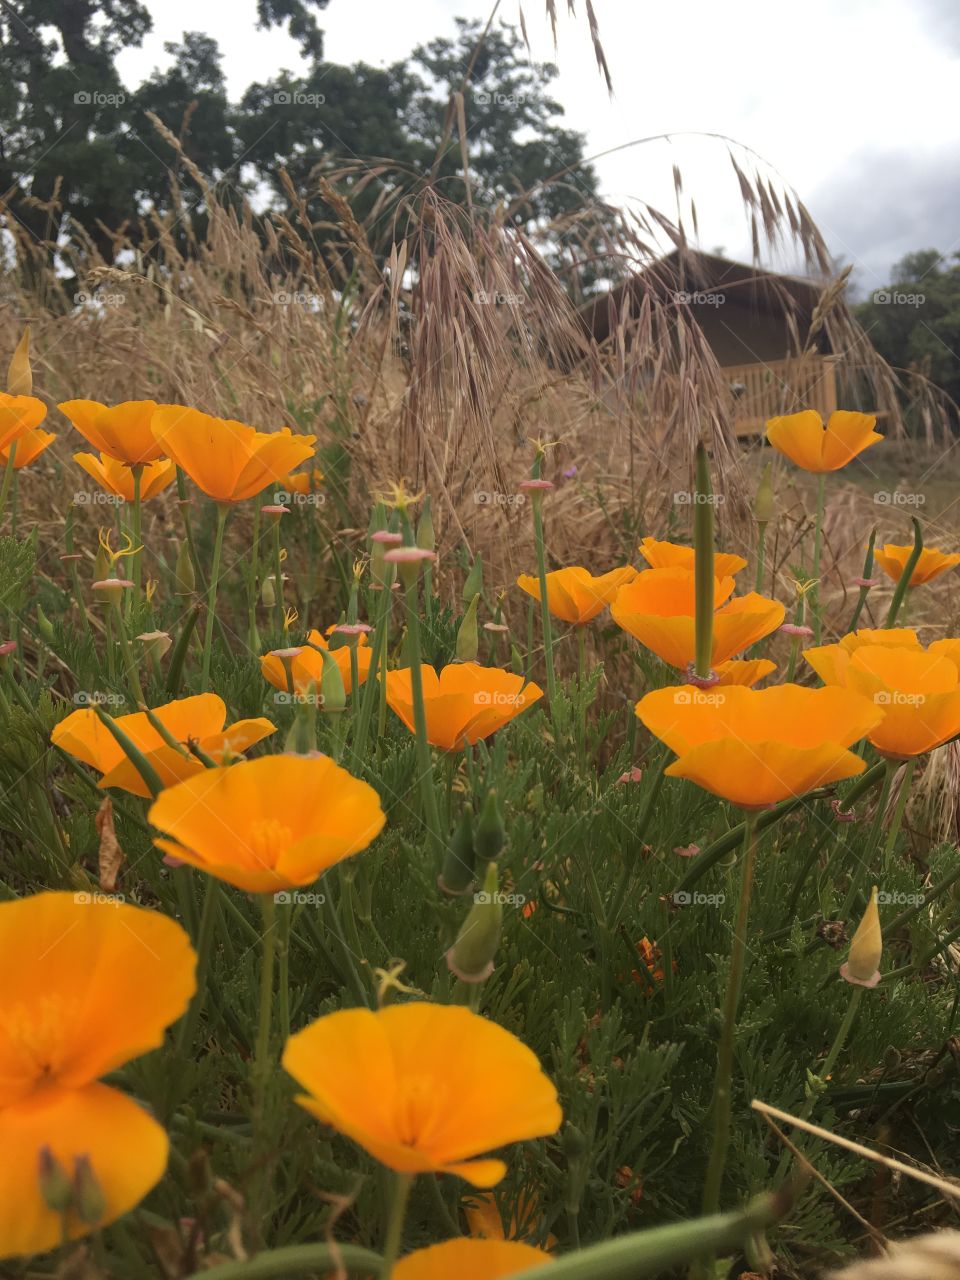 California Poppy’s blooming in the summer!